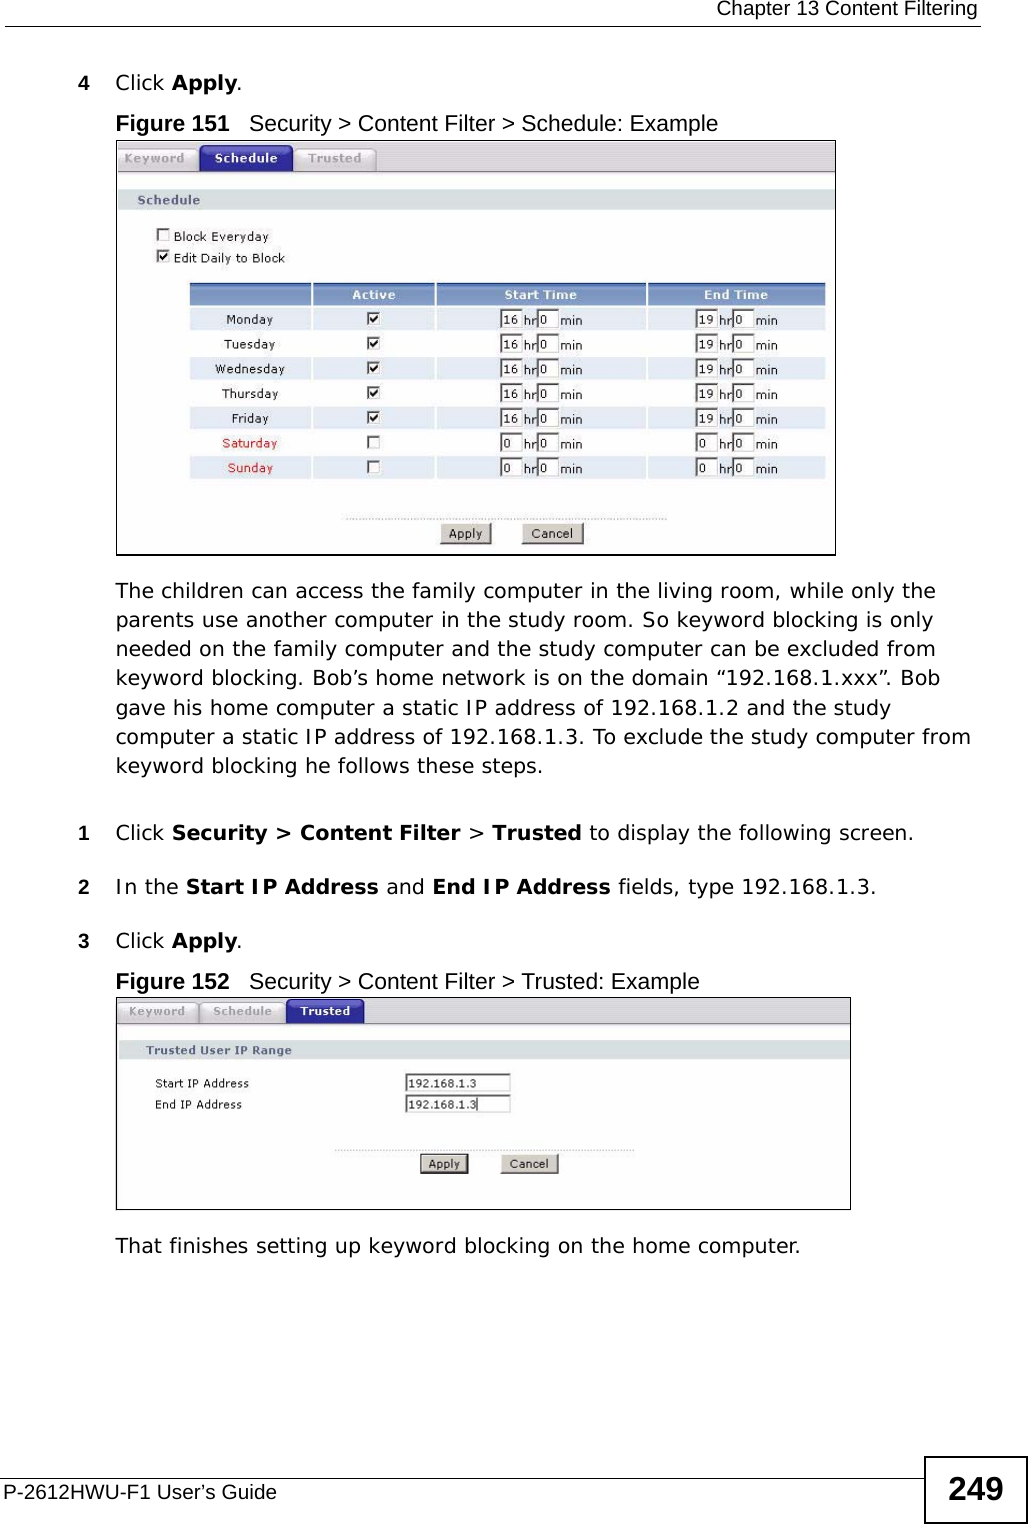  Chapter 13 Content FilteringP-2612HWU-F1 User’s Guide 2494Click Apply.Figure 151   Security &gt; Content Filter &gt; Schedule: ExampleThe children can access the family computer in the living room, while only the parents use another computer in the study room. So keyword blocking is only needed on the family computer and the study computer can be excluded from keyword blocking. Bob’s home network is on the domain “192.168.1.xxx”. Bob gave his home computer a static IP address of 192.168.1.2 and the study computer a static IP address of 192.168.1.3. To exclude the study computer from keyword blocking he follows these steps. 1Click Security &gt; Content Filter &gt; Trusted to display the following screen.2In the Start IP Address and End IP Address fields, type 192.168.1.3.3Click Apply.Figure 152   Security &gt; Content Filter &gt; Trusted: ExampleThat finishes setting up keyword blocking on the home computer.